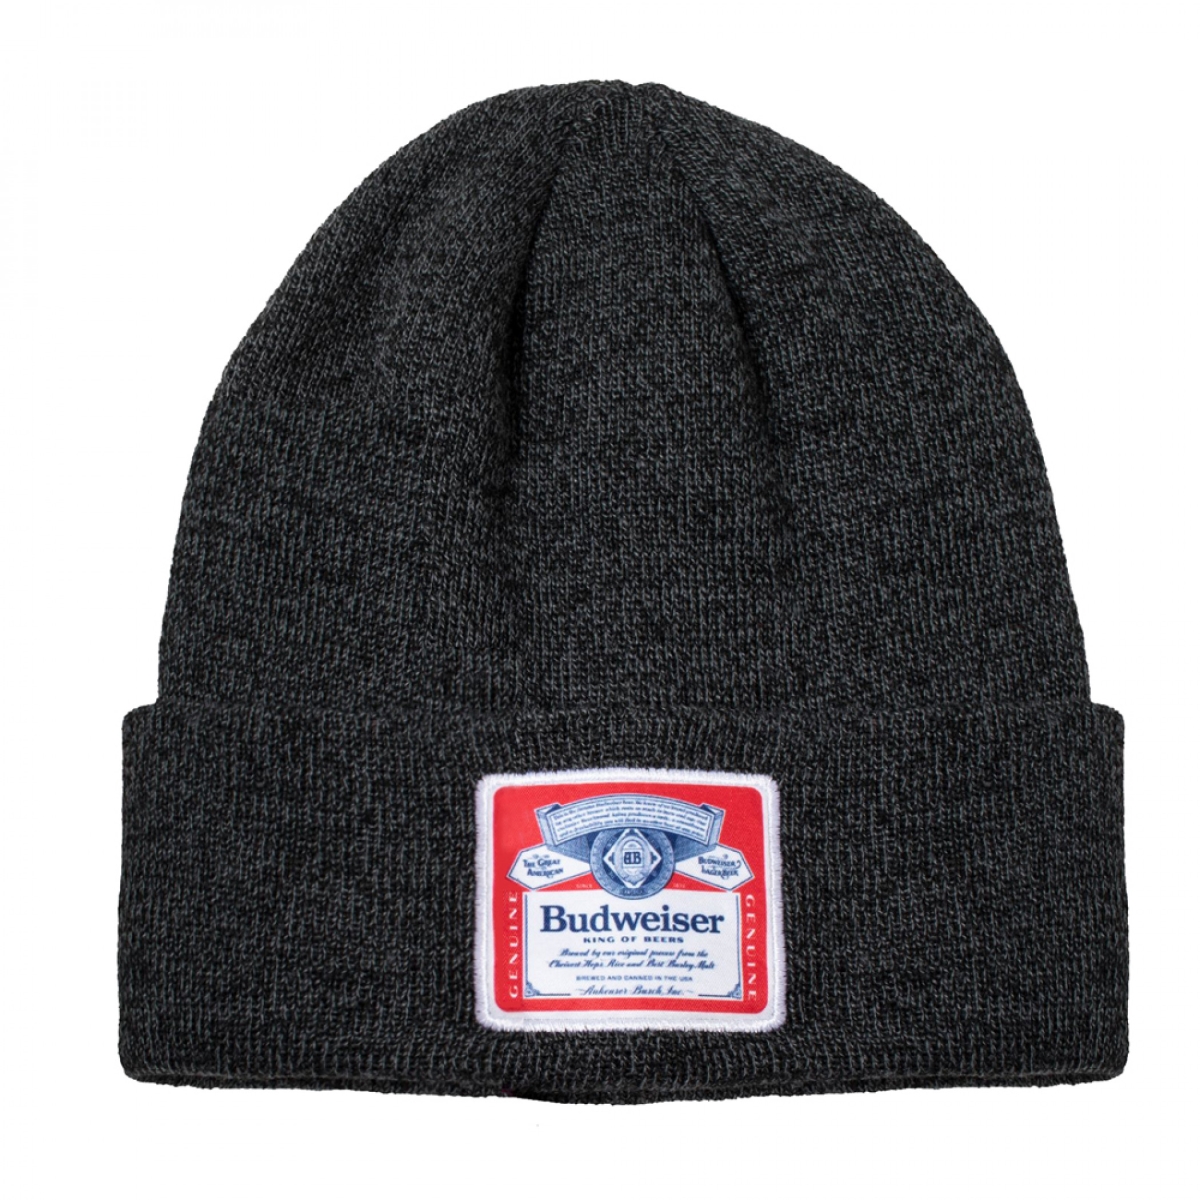 Picture of Budweiser 831188 Label Patch Black Knit Cuff Beanie